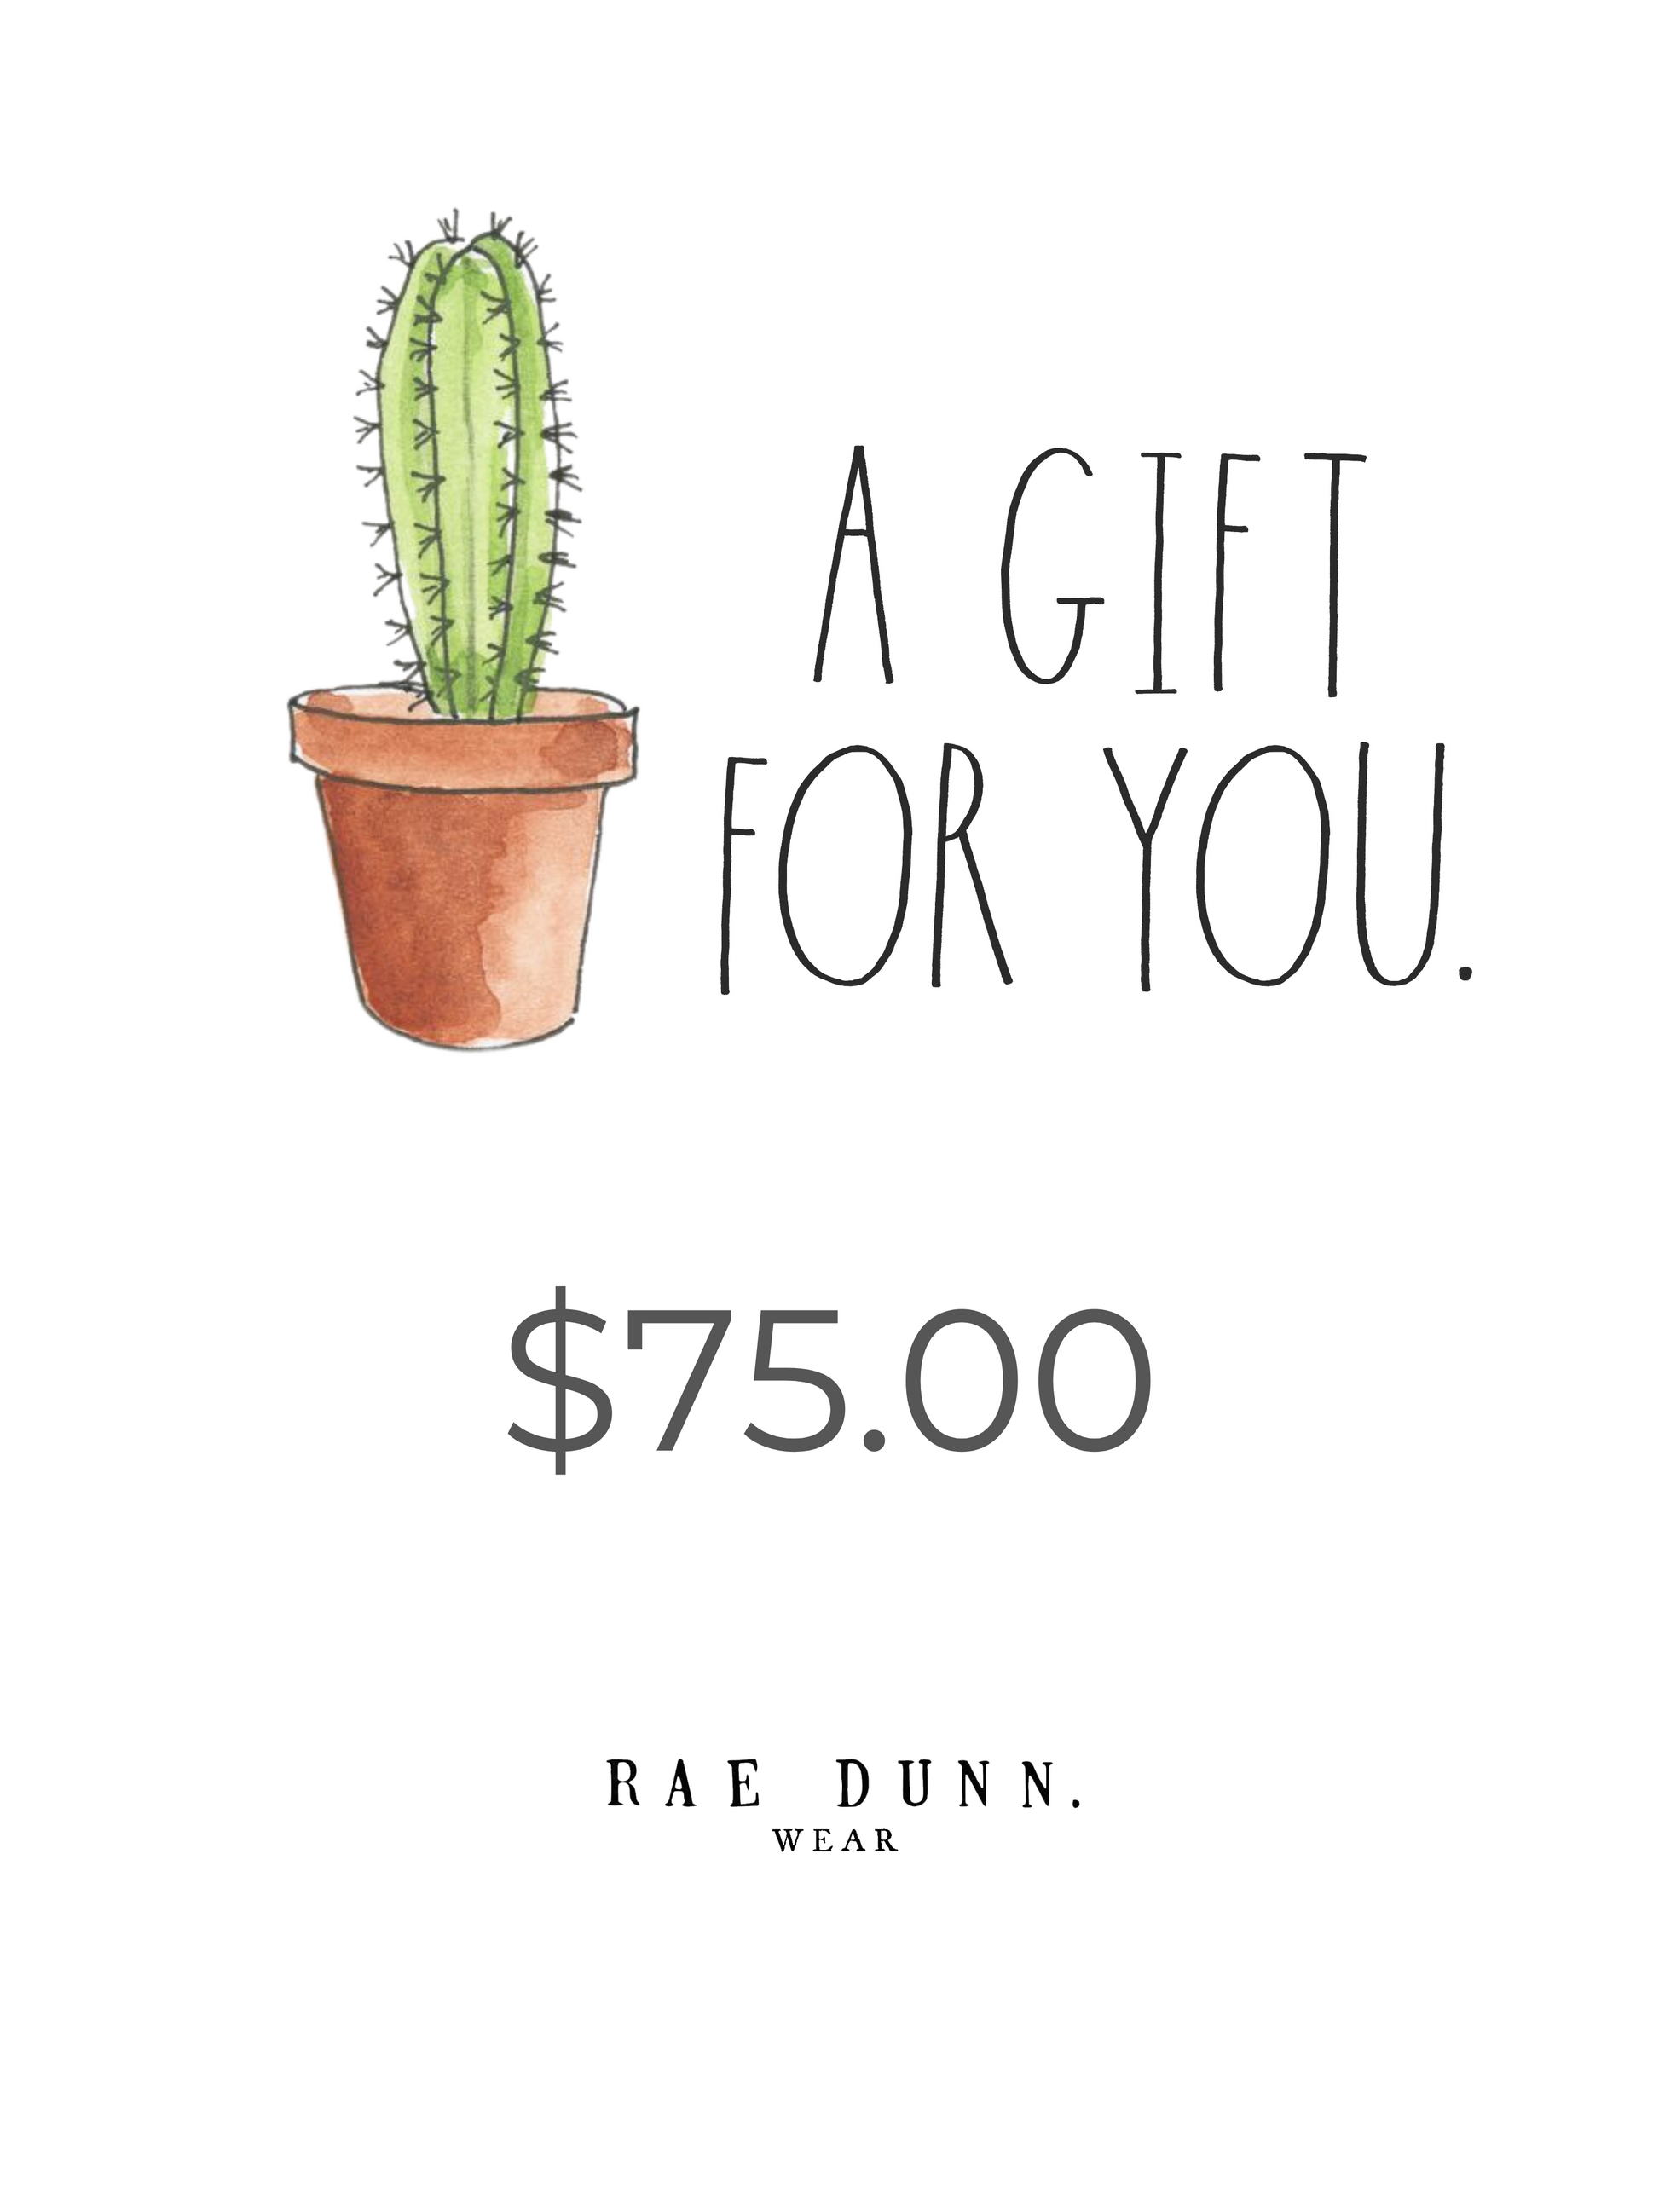 "A GIFT FOR YOU" E-Gift Card - Rae Dunn Wear - Gift Cards